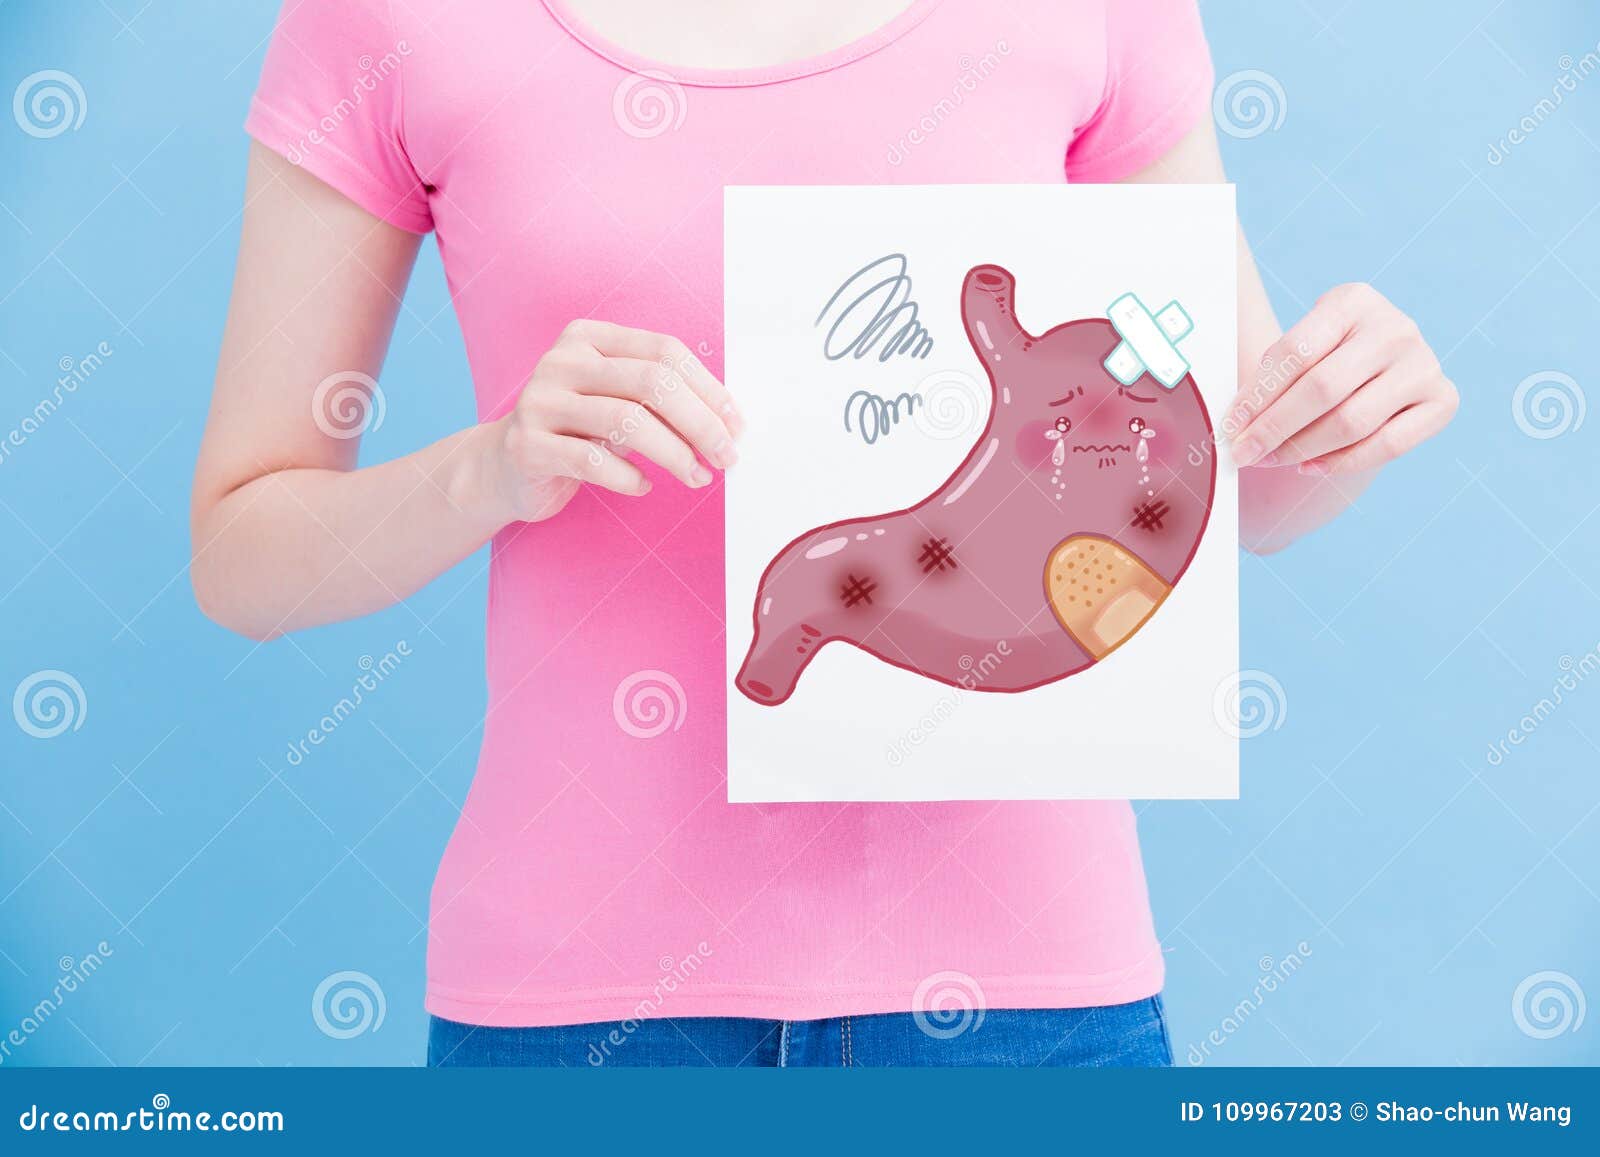 woman with unhealth stomach